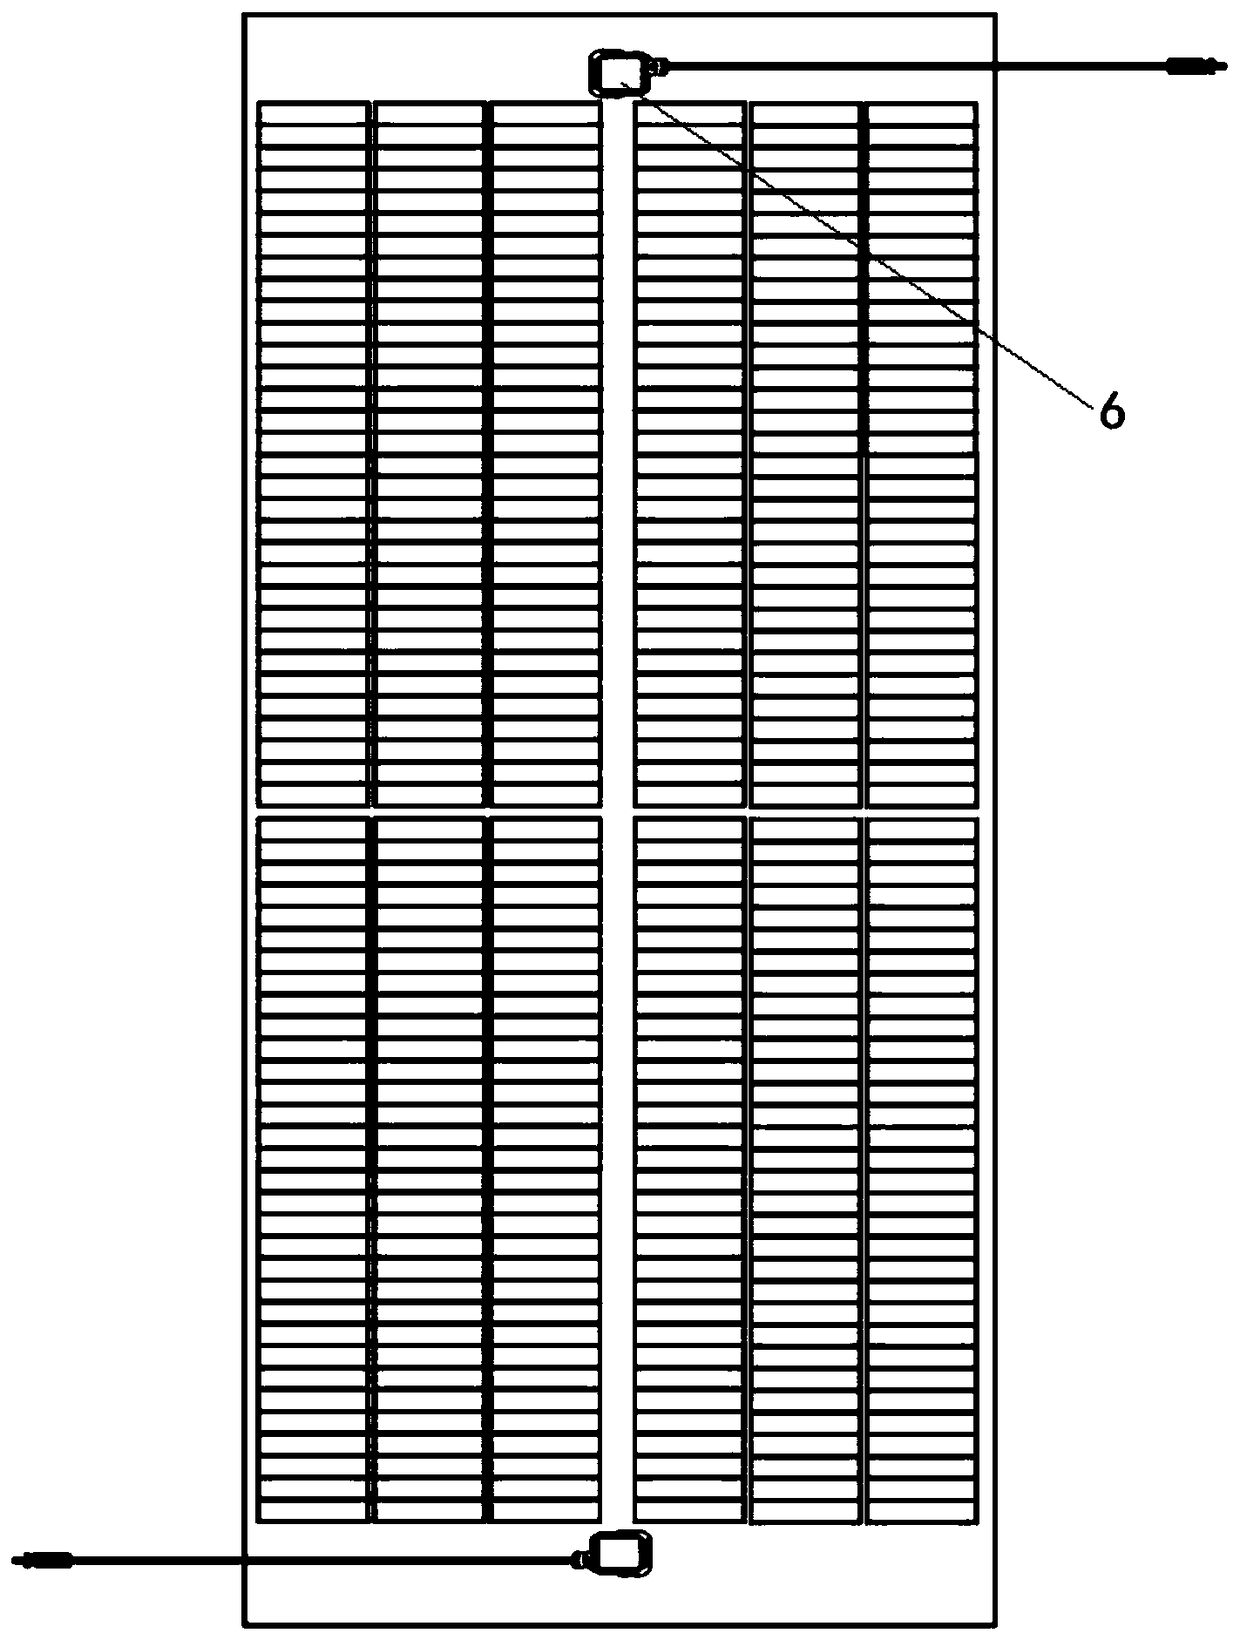 Double-side photovoltaic assembly